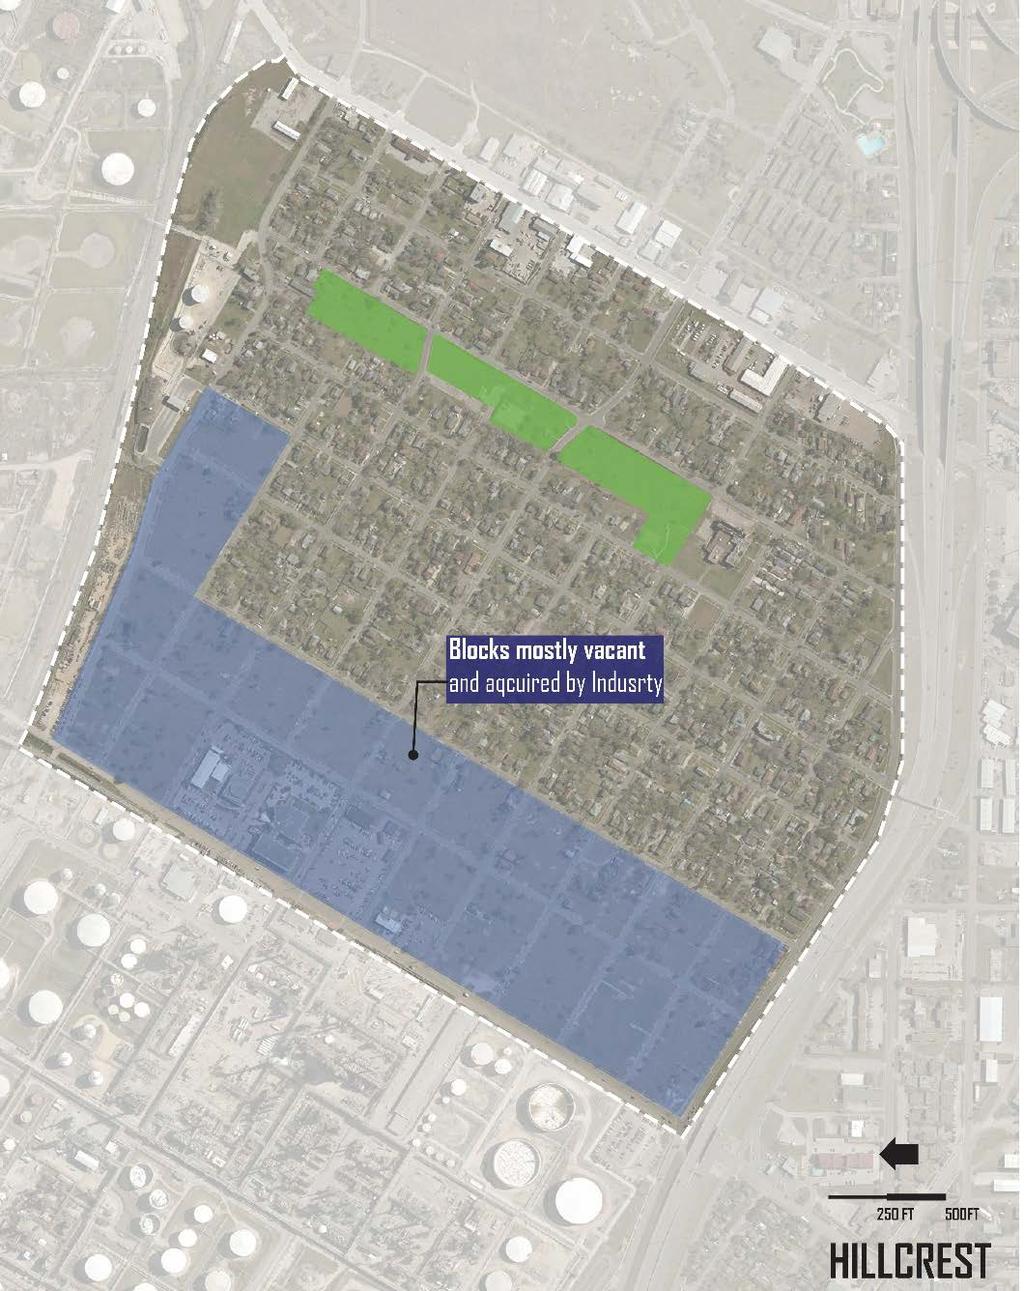 Hillcrest Assist owner-occupants in negotiating fair prices for sale of land (coordinated with parallel efforts for other challenged neighborhoods) Provide new options for residents o